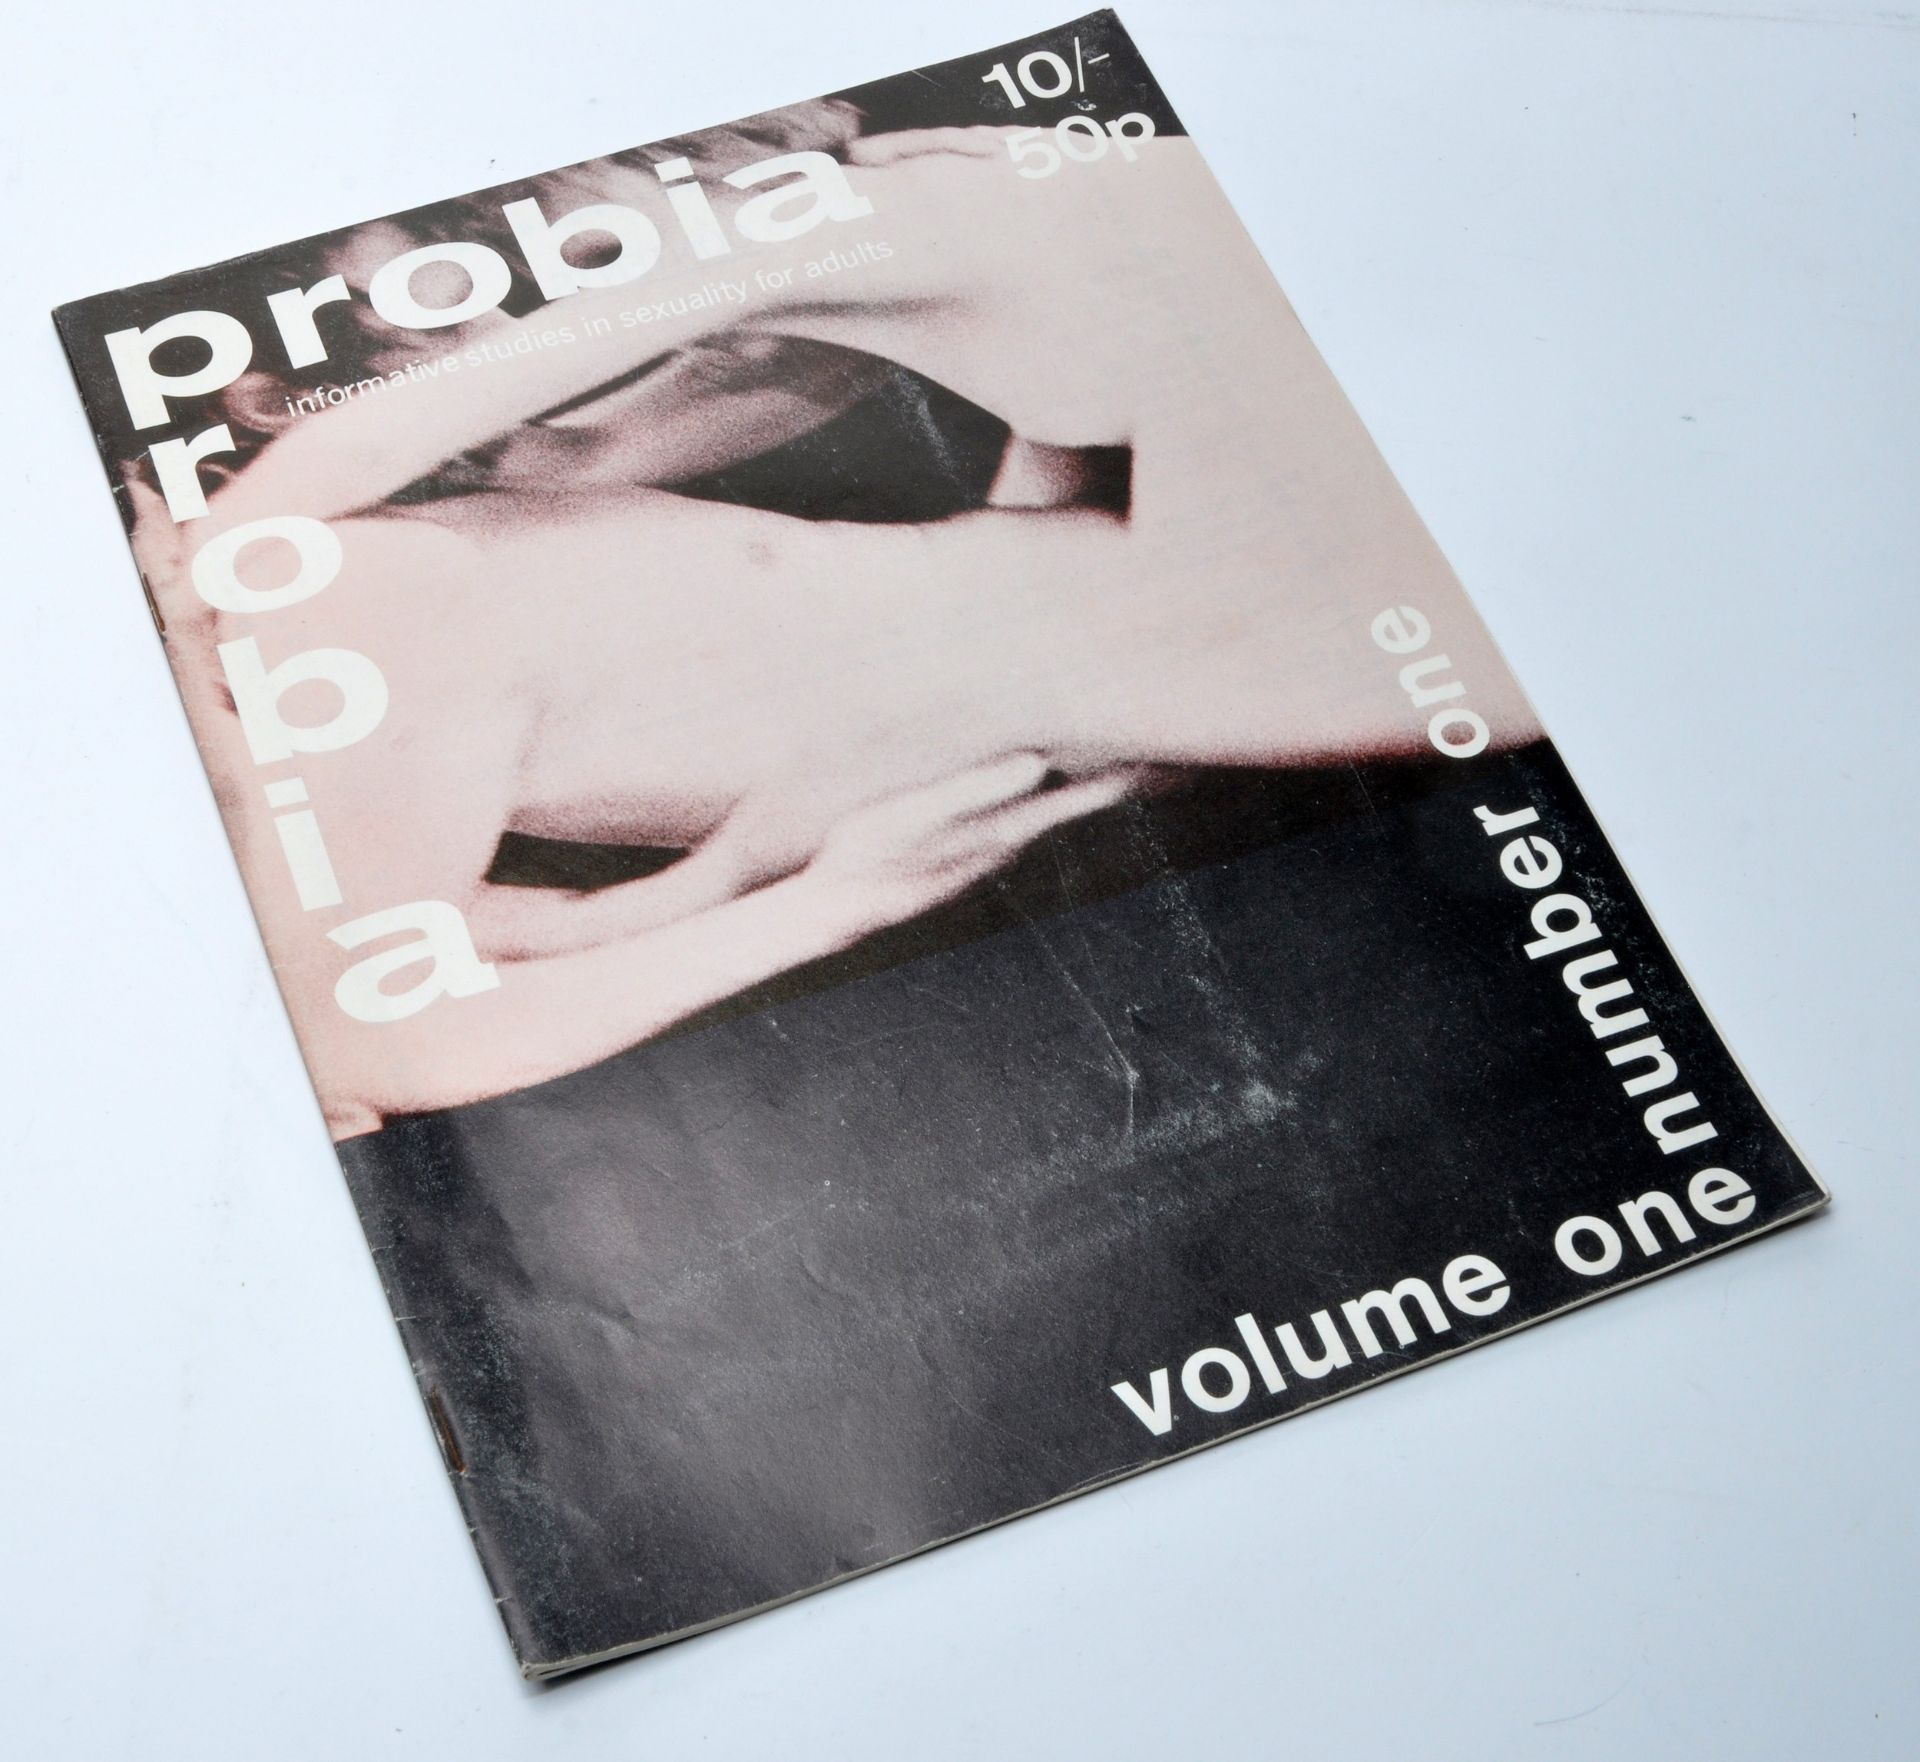 Adult Glamour Magazine / Vintage Erotica, comprising single issue of Probia. Issue 1. Please note